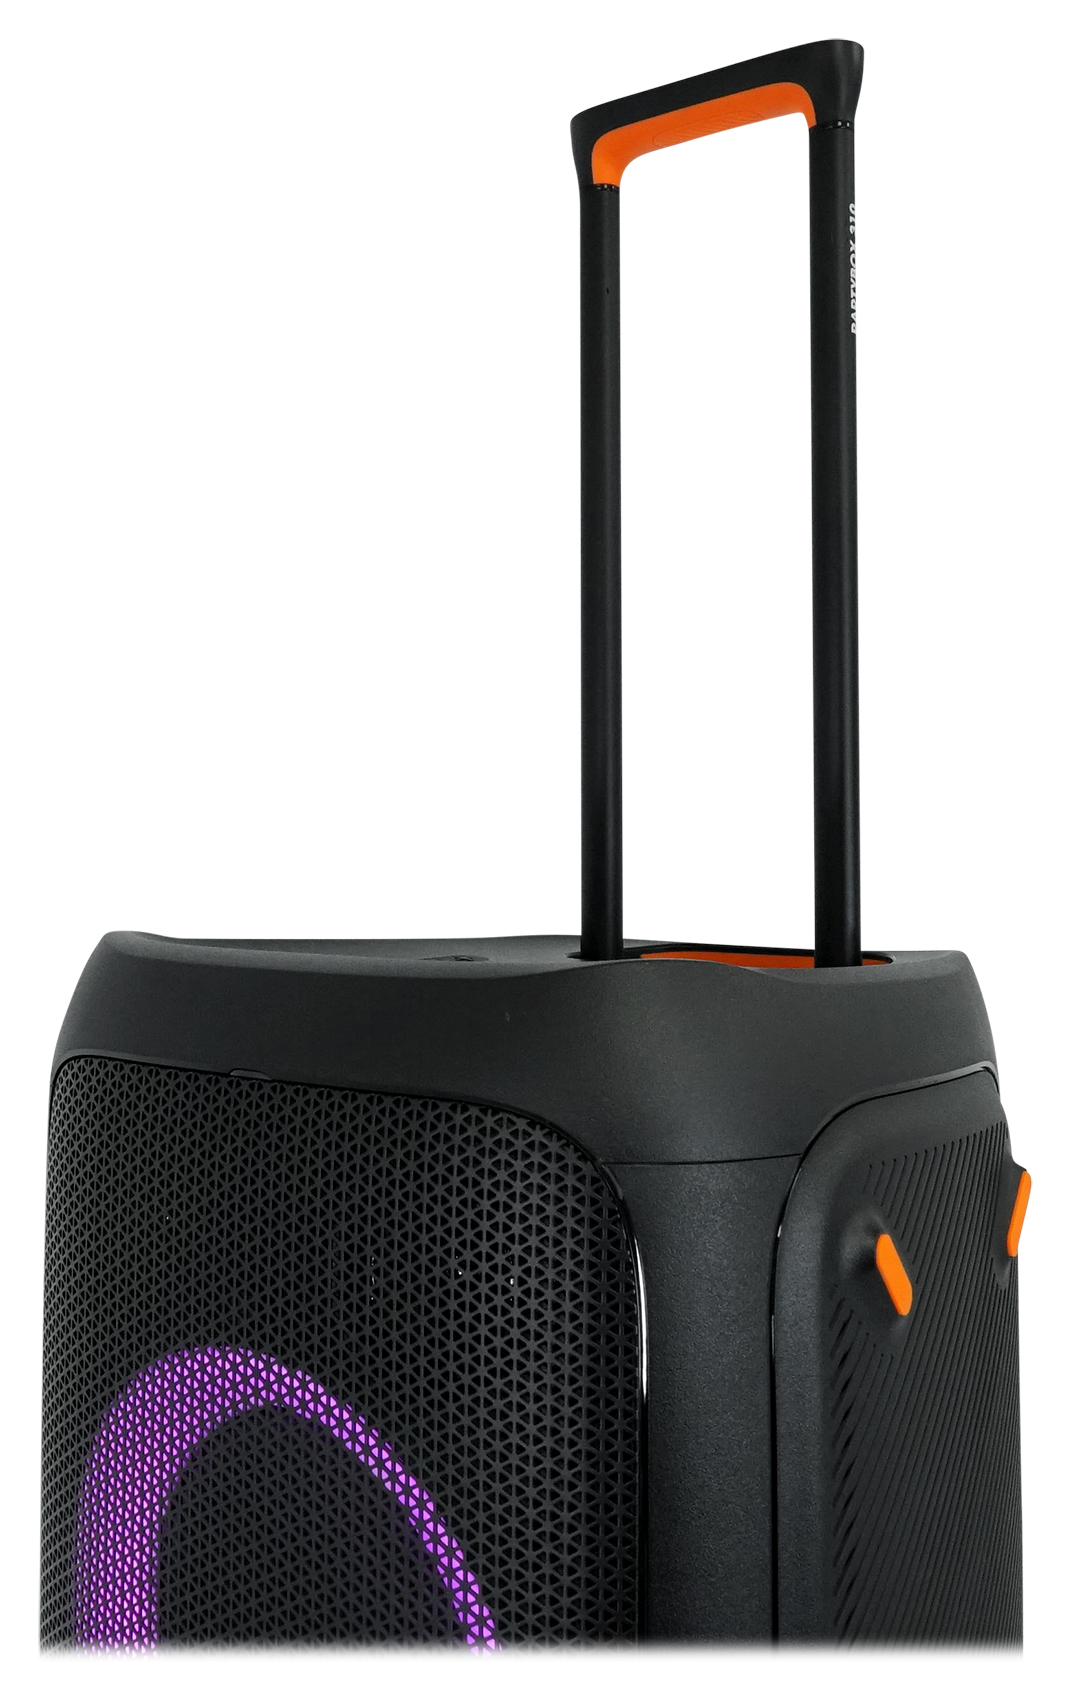 JBL Partybox 310 Portable Bluetooth Party Speaker